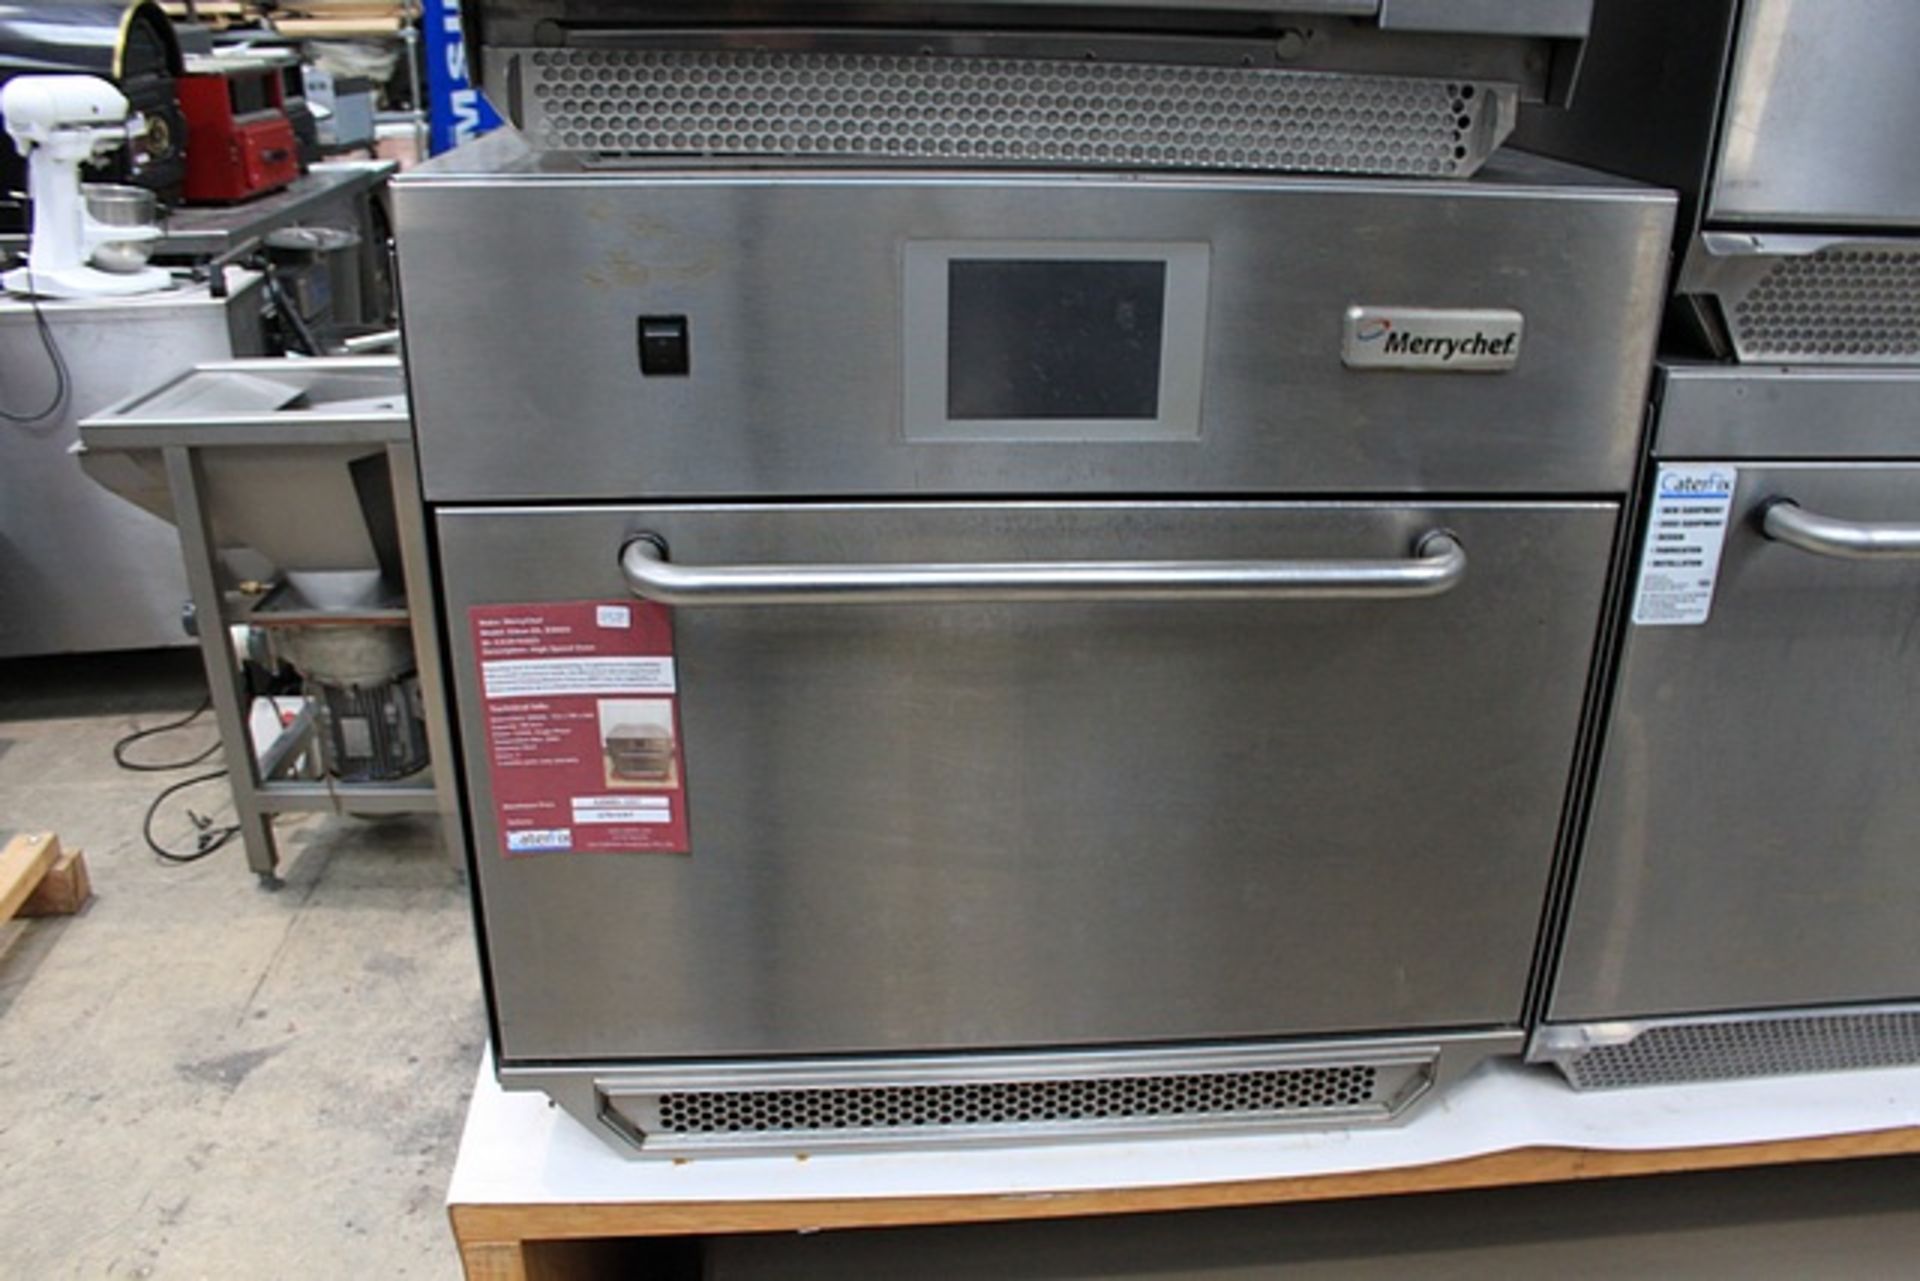 Merrychef EIKON ES ESNSV Stainless Steel High Speed Oven Featuring cool-to-touch engineering, 2/3